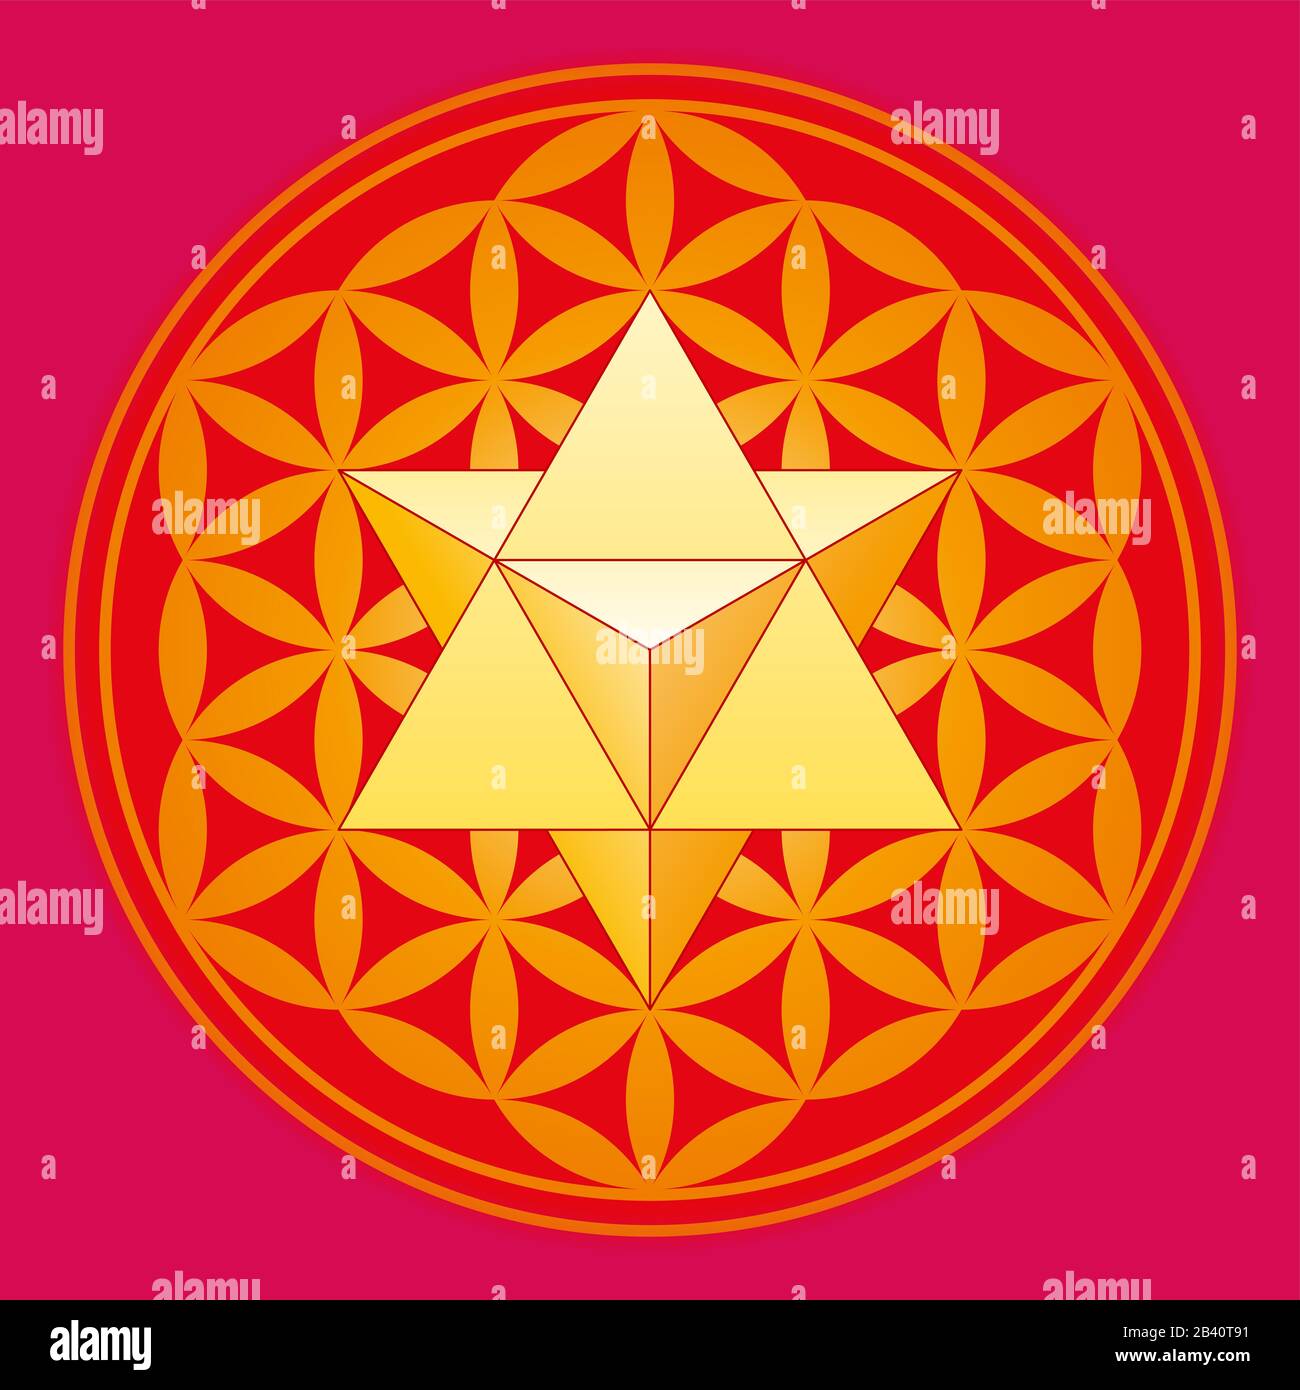 A star tetrahedron also called Merkaba, in the Flower of Life. A double tetrahedron in a geometrical figure, composed of overlapping circles. Stock Photo